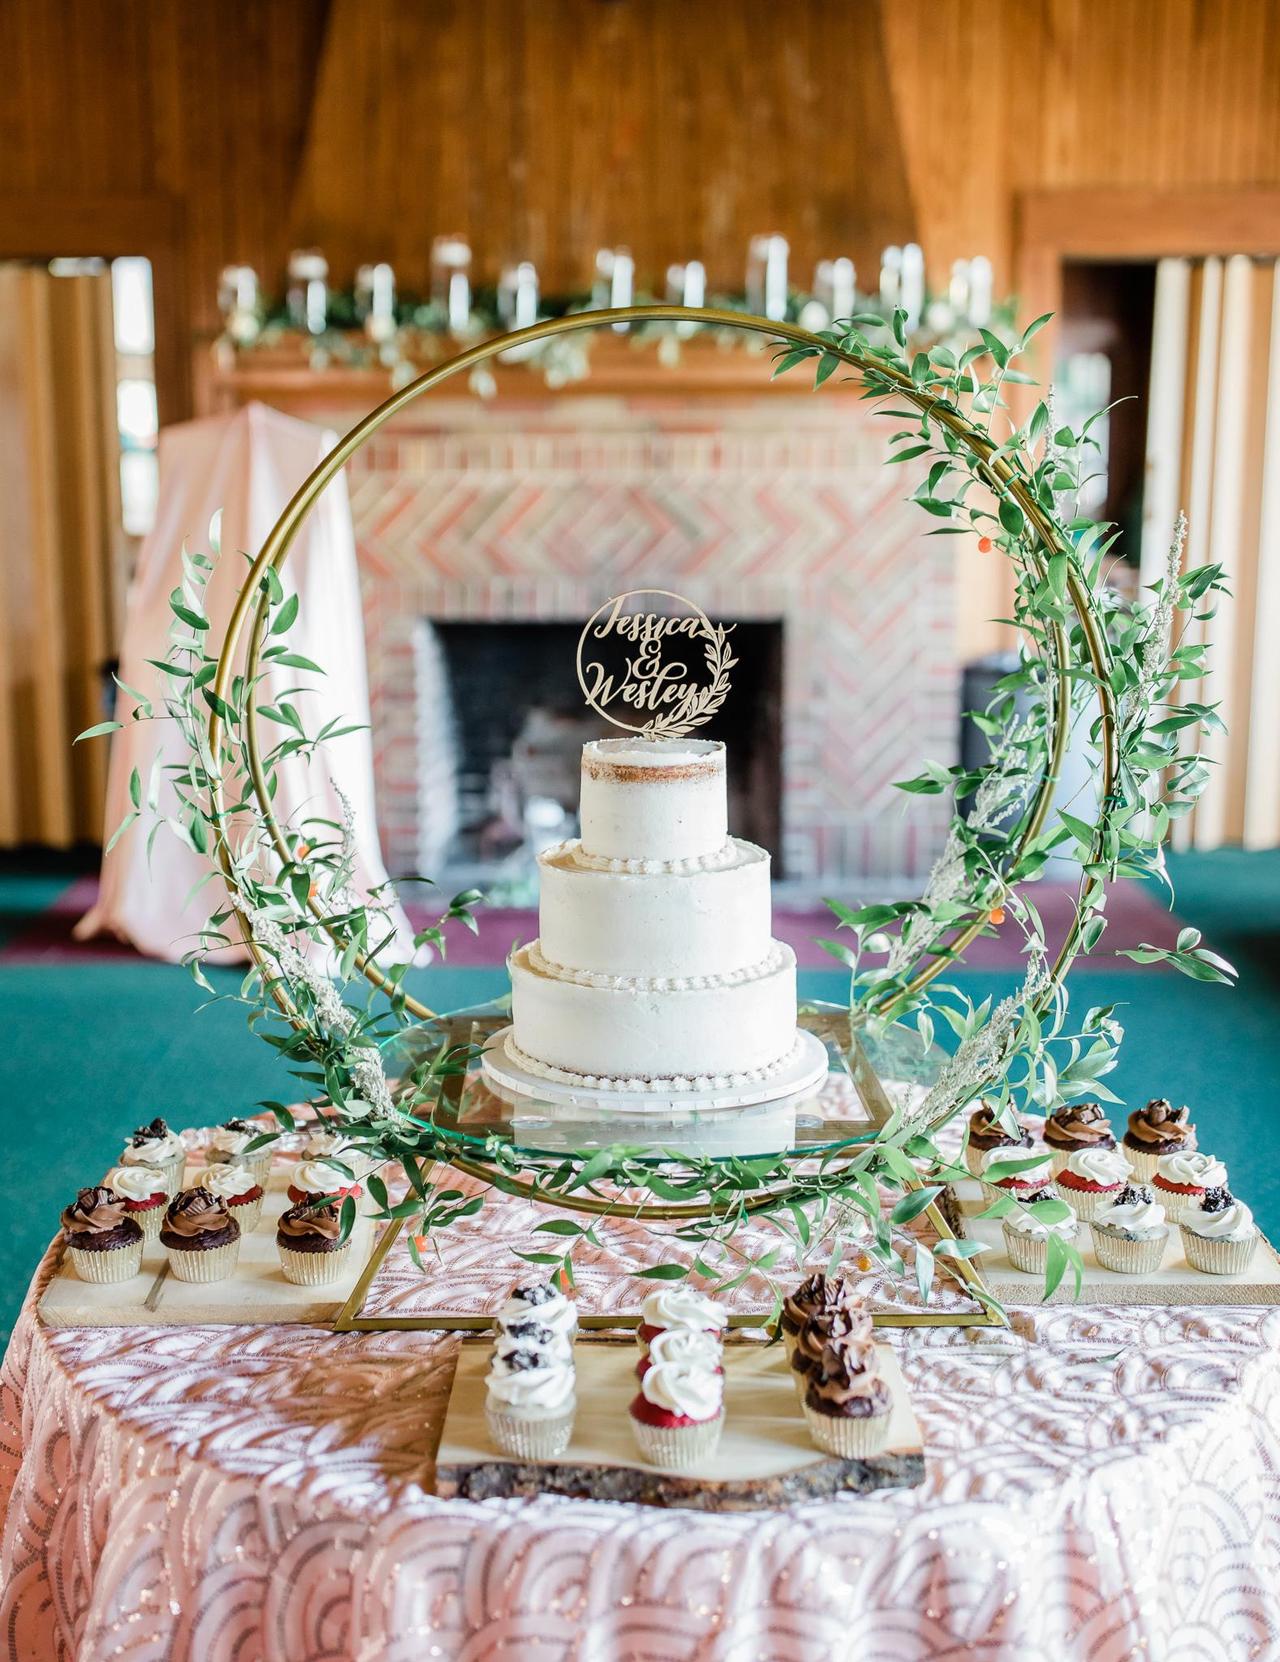 Wedding Cake Trends to Watch Out For in 2023 – Made by Hand Cakes